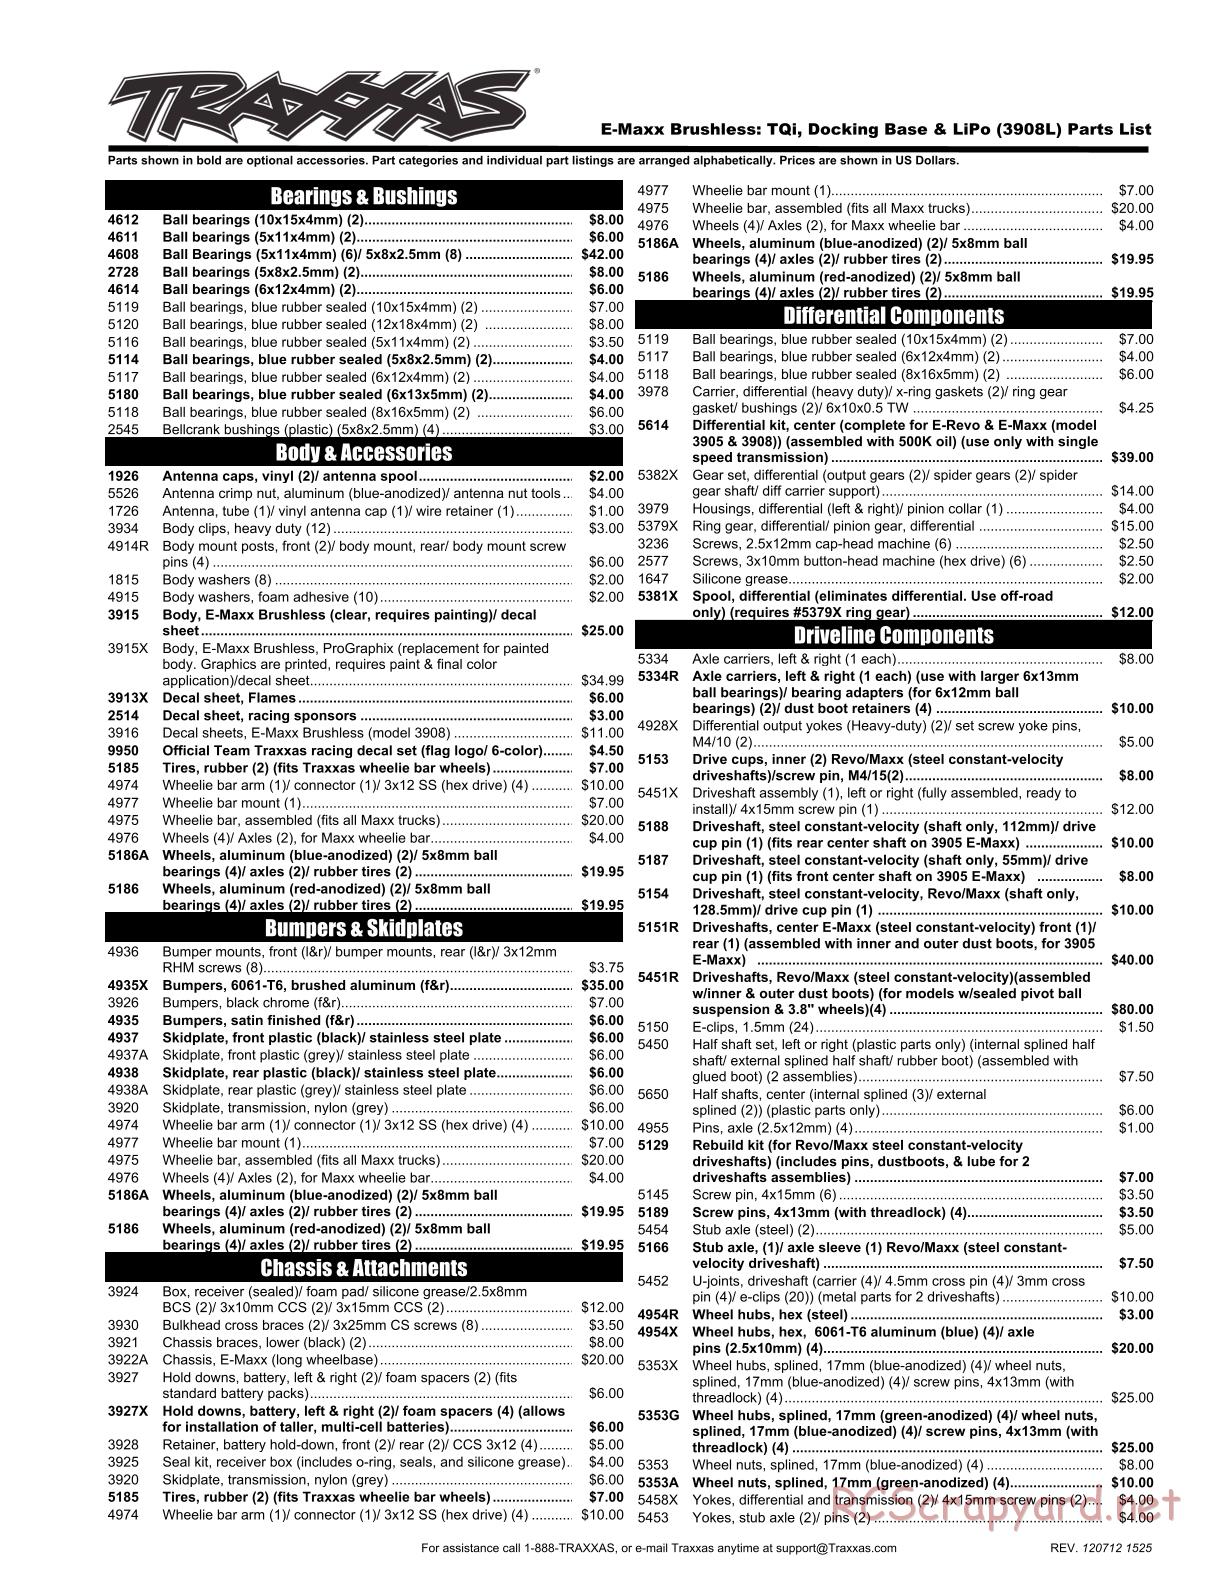 Traxxas - E-Maxx Brushless - Parts List - Page 1